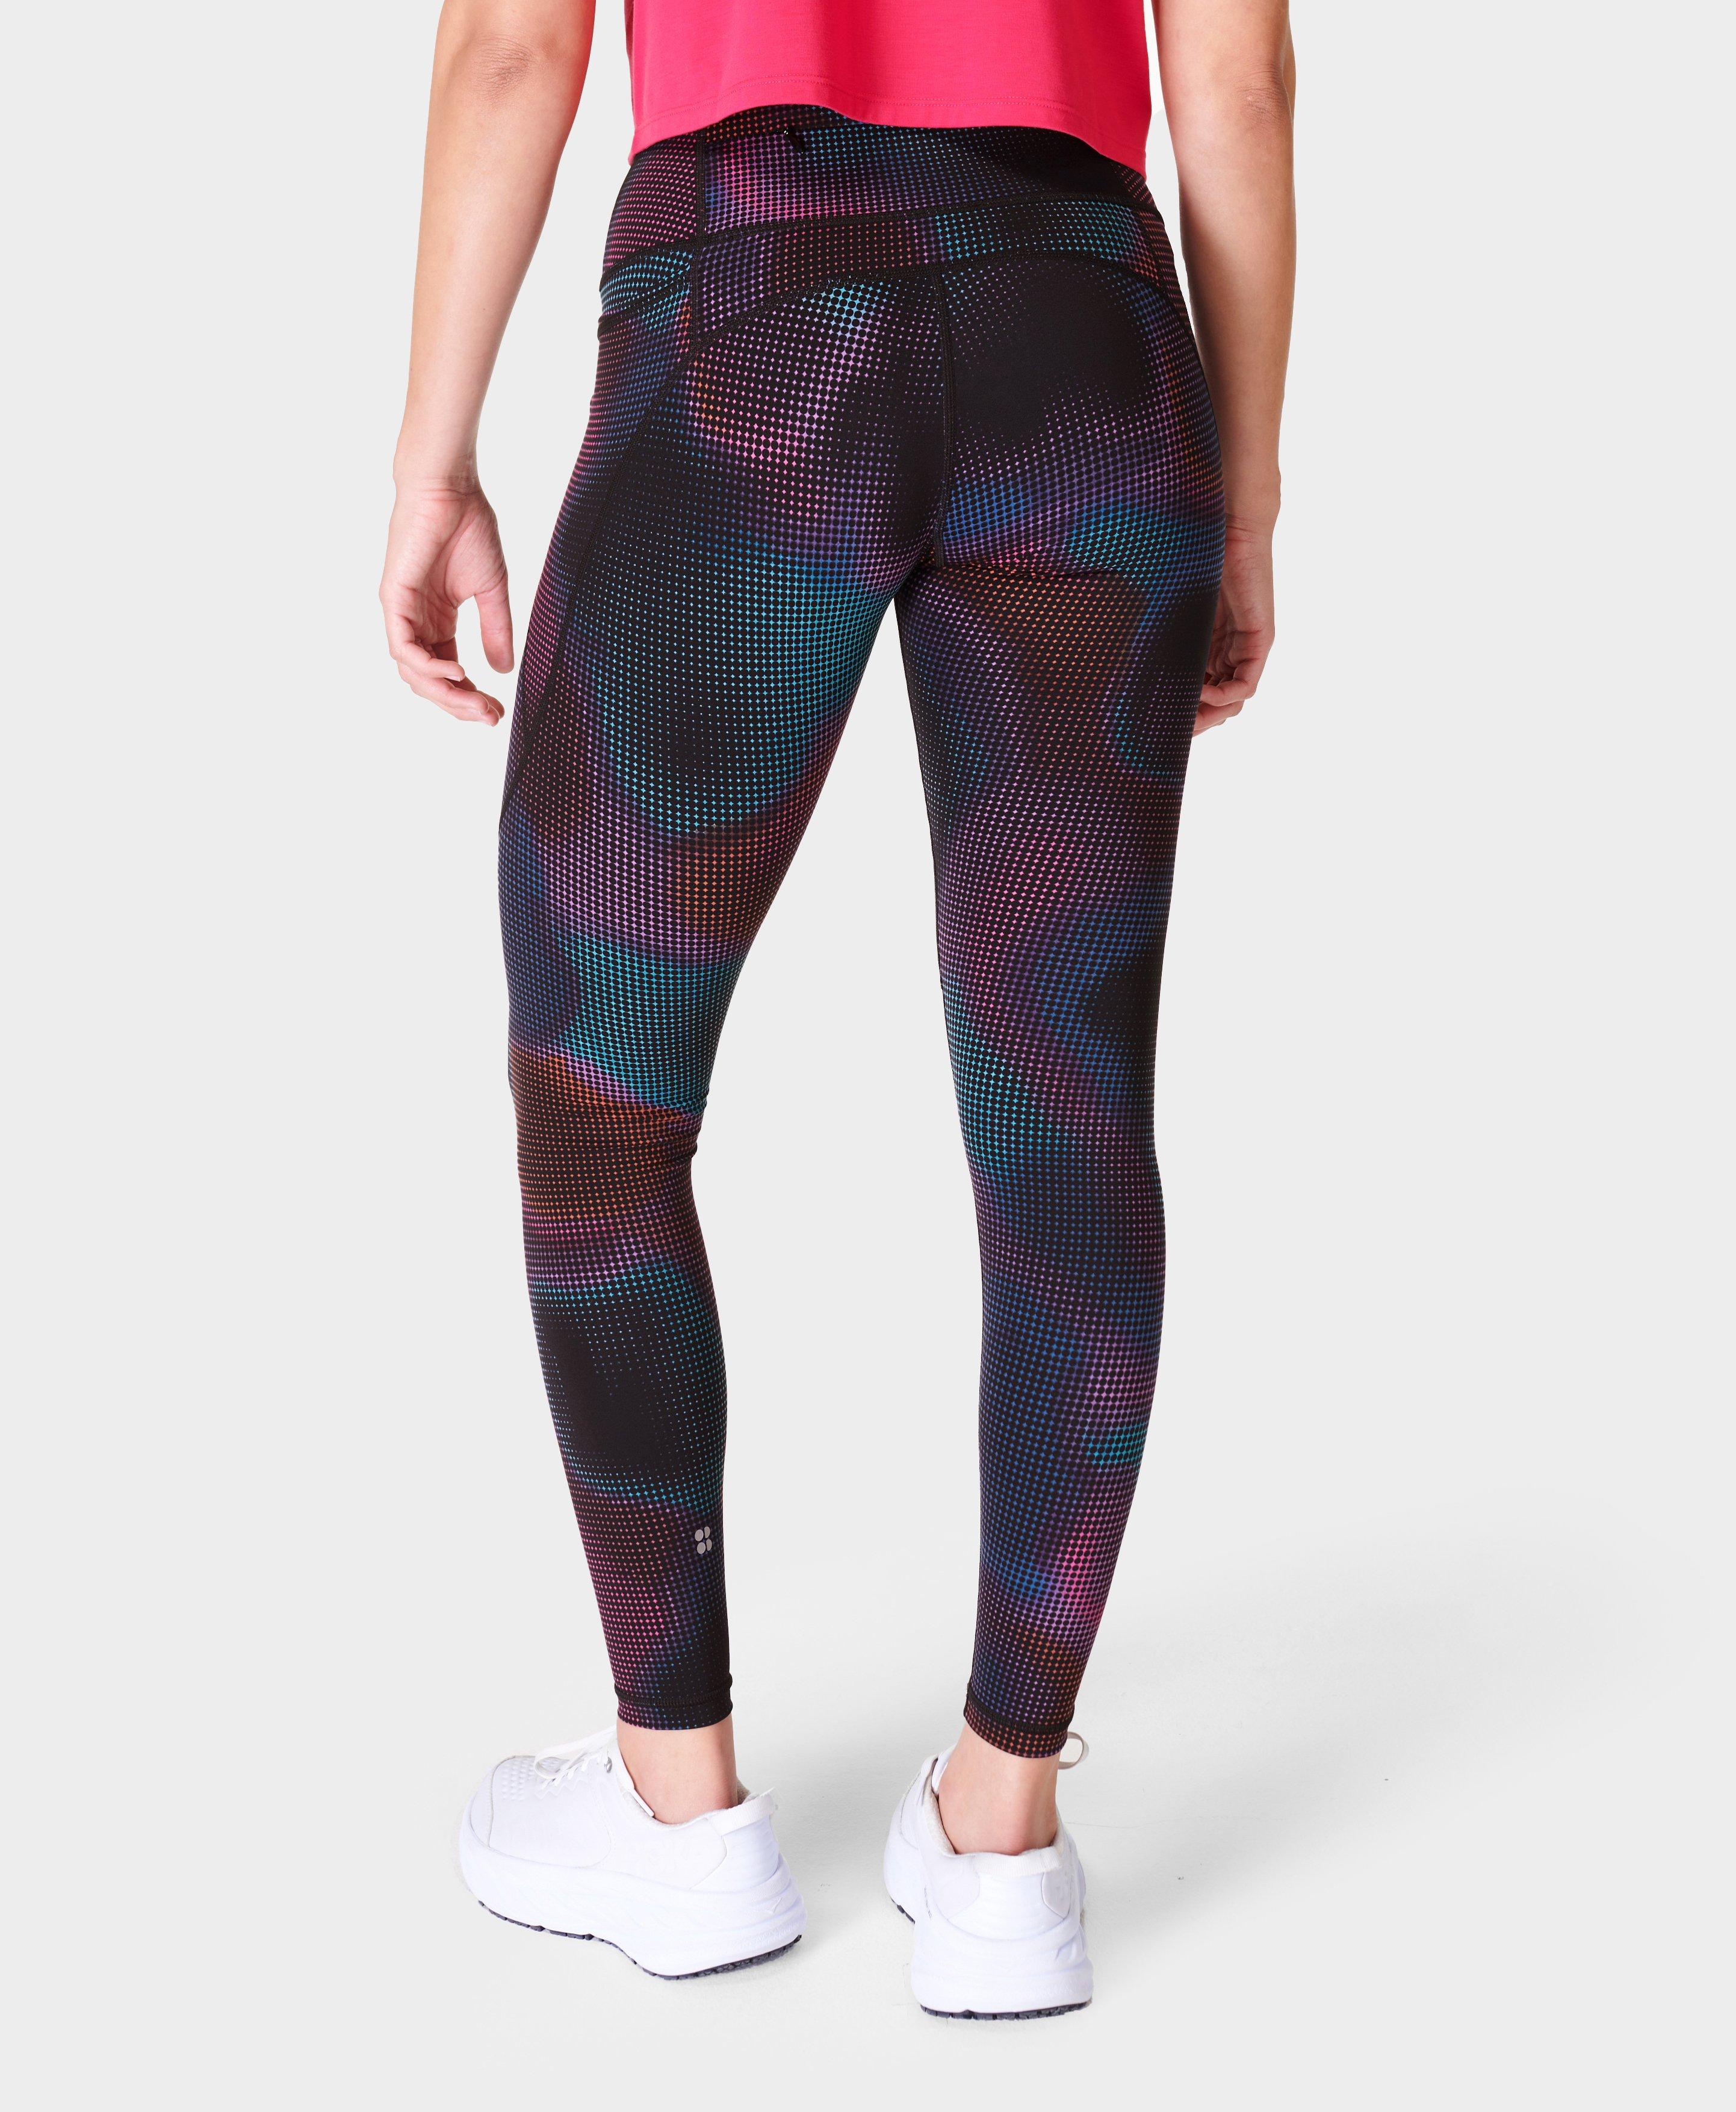 Fitness Fridays - Printed Workout Leggings for Under $50 - Dawn P